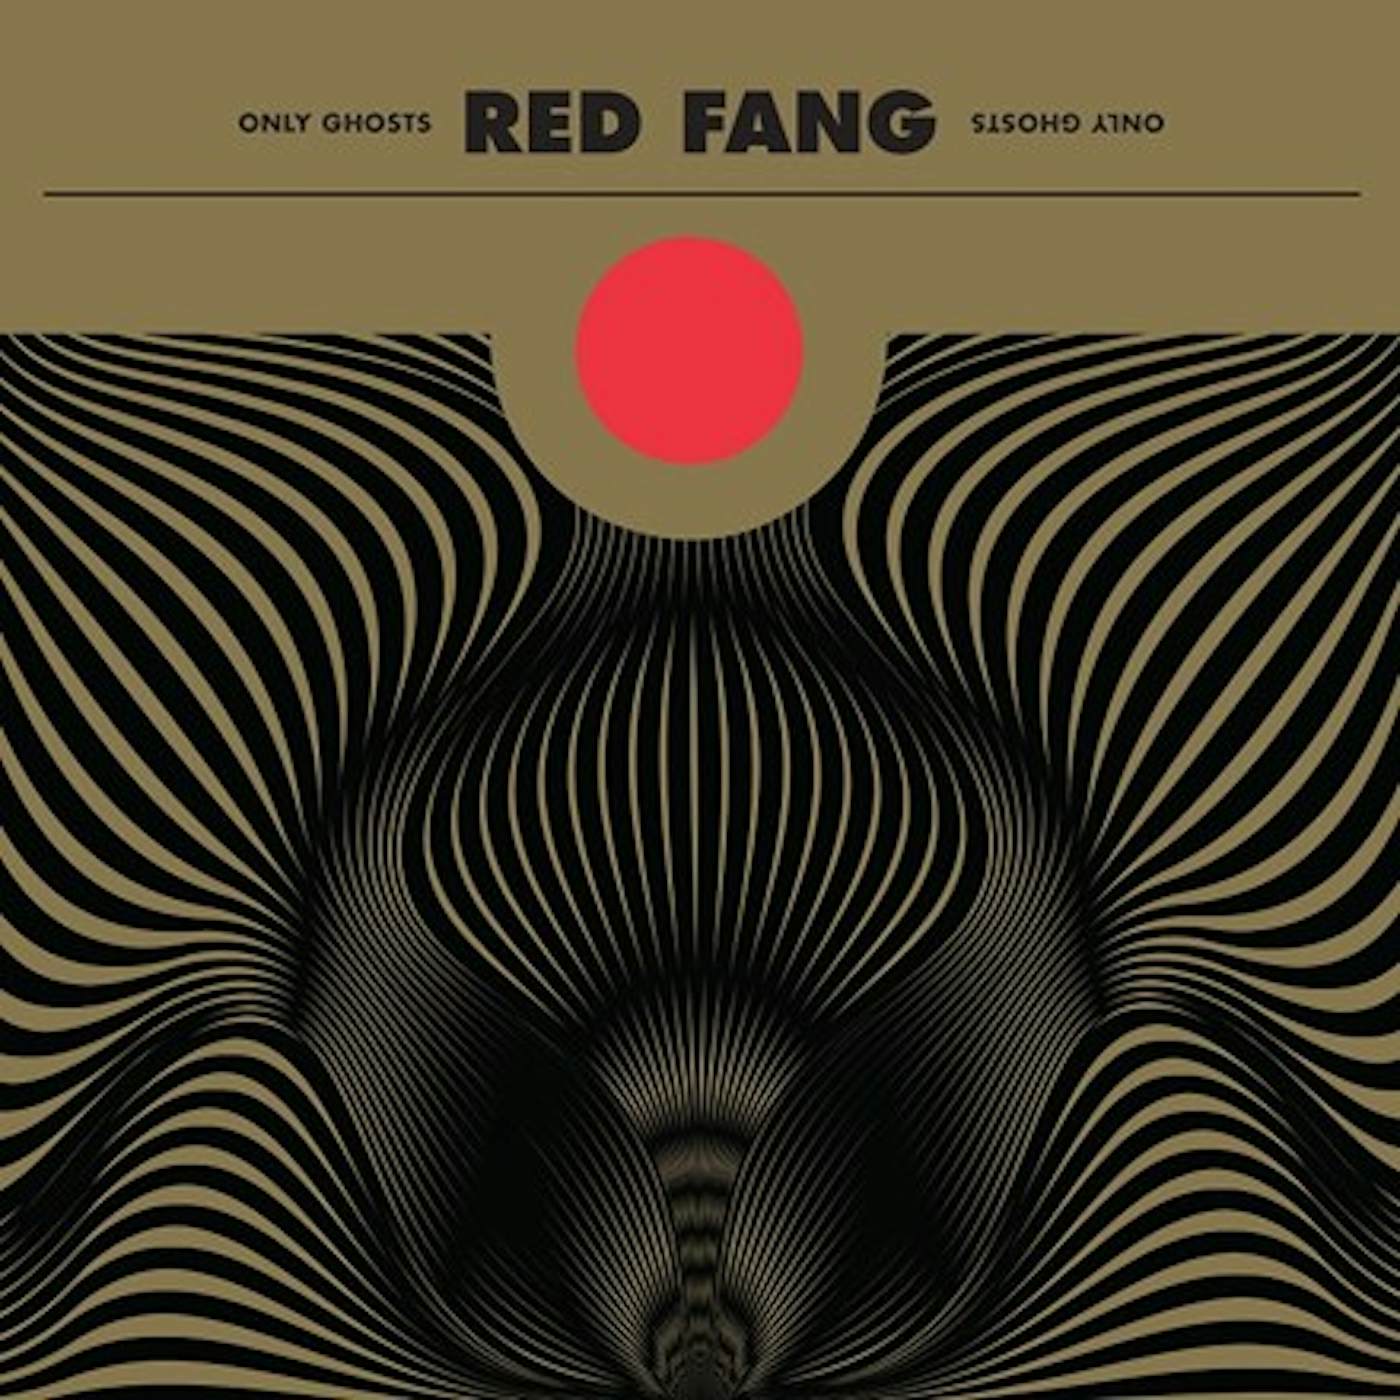 Red Fang ONLY GHOSTS Vinyl Record